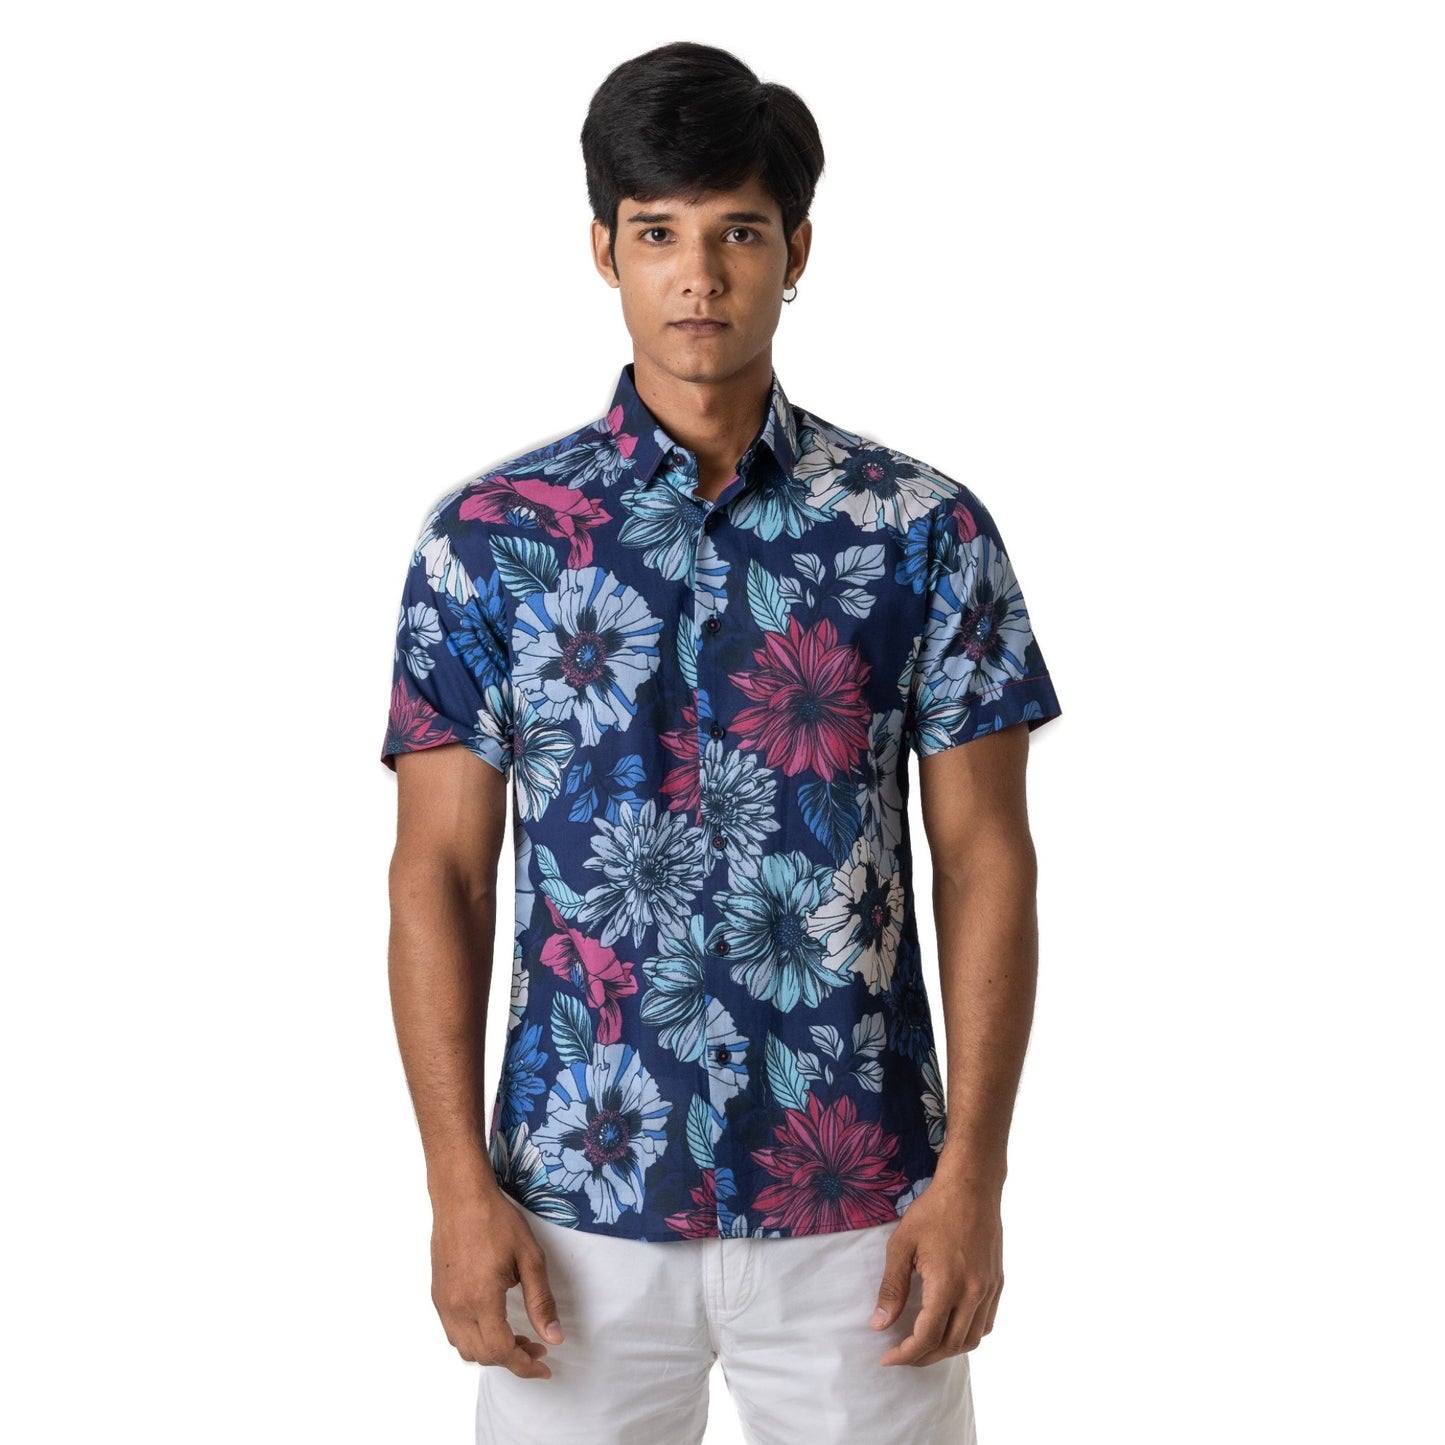 Short sleeve shirt in navy floral printed voile